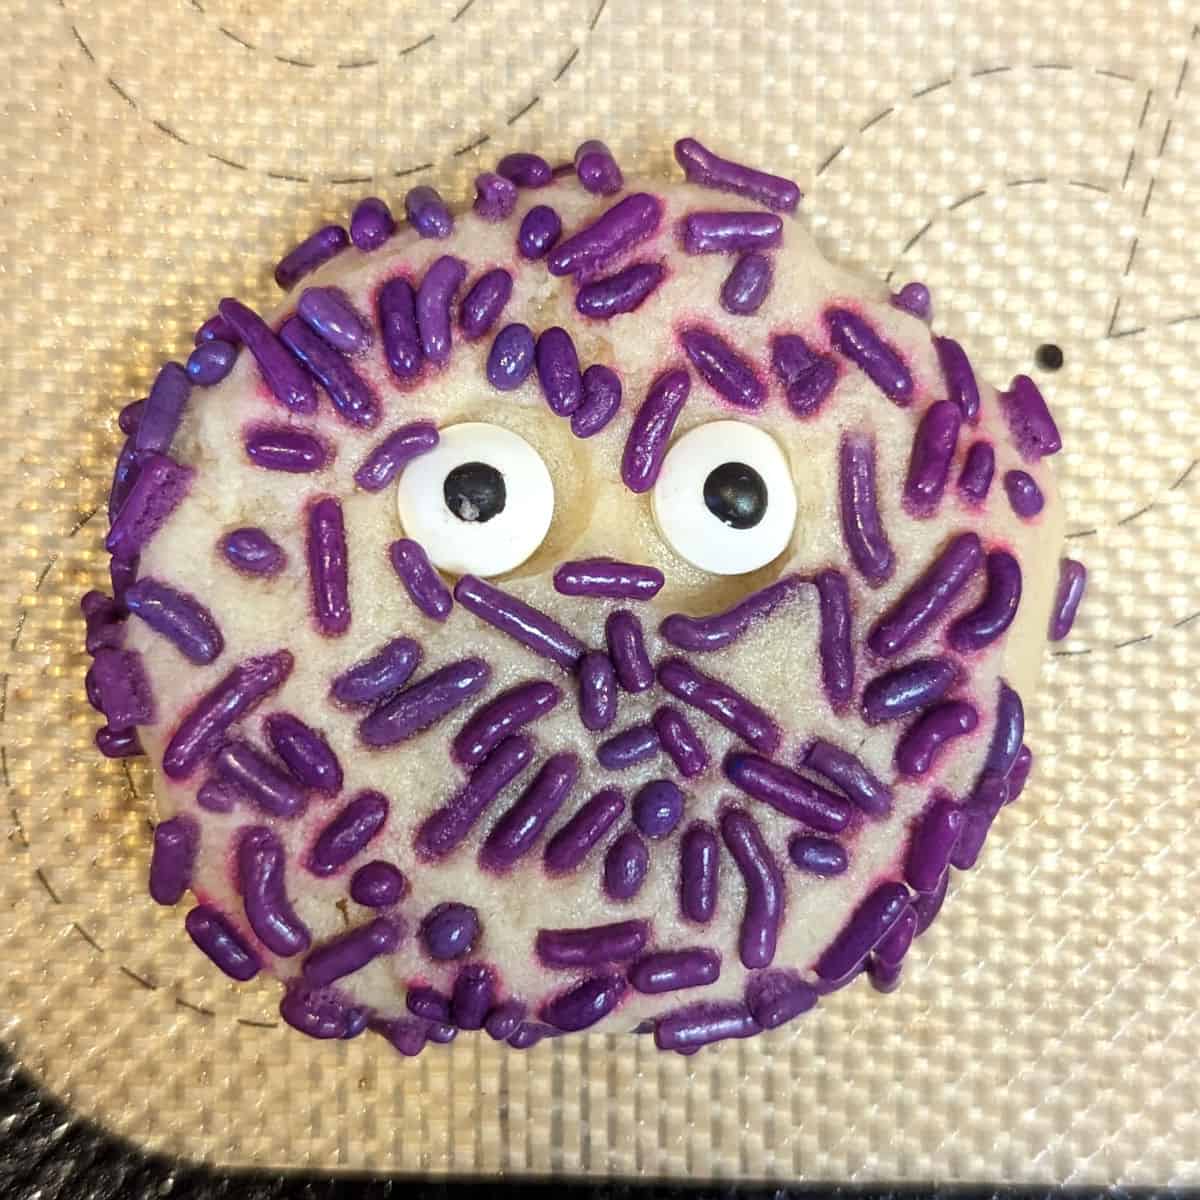 sprinkle cookie with candy eyes baked onto it to make it a face